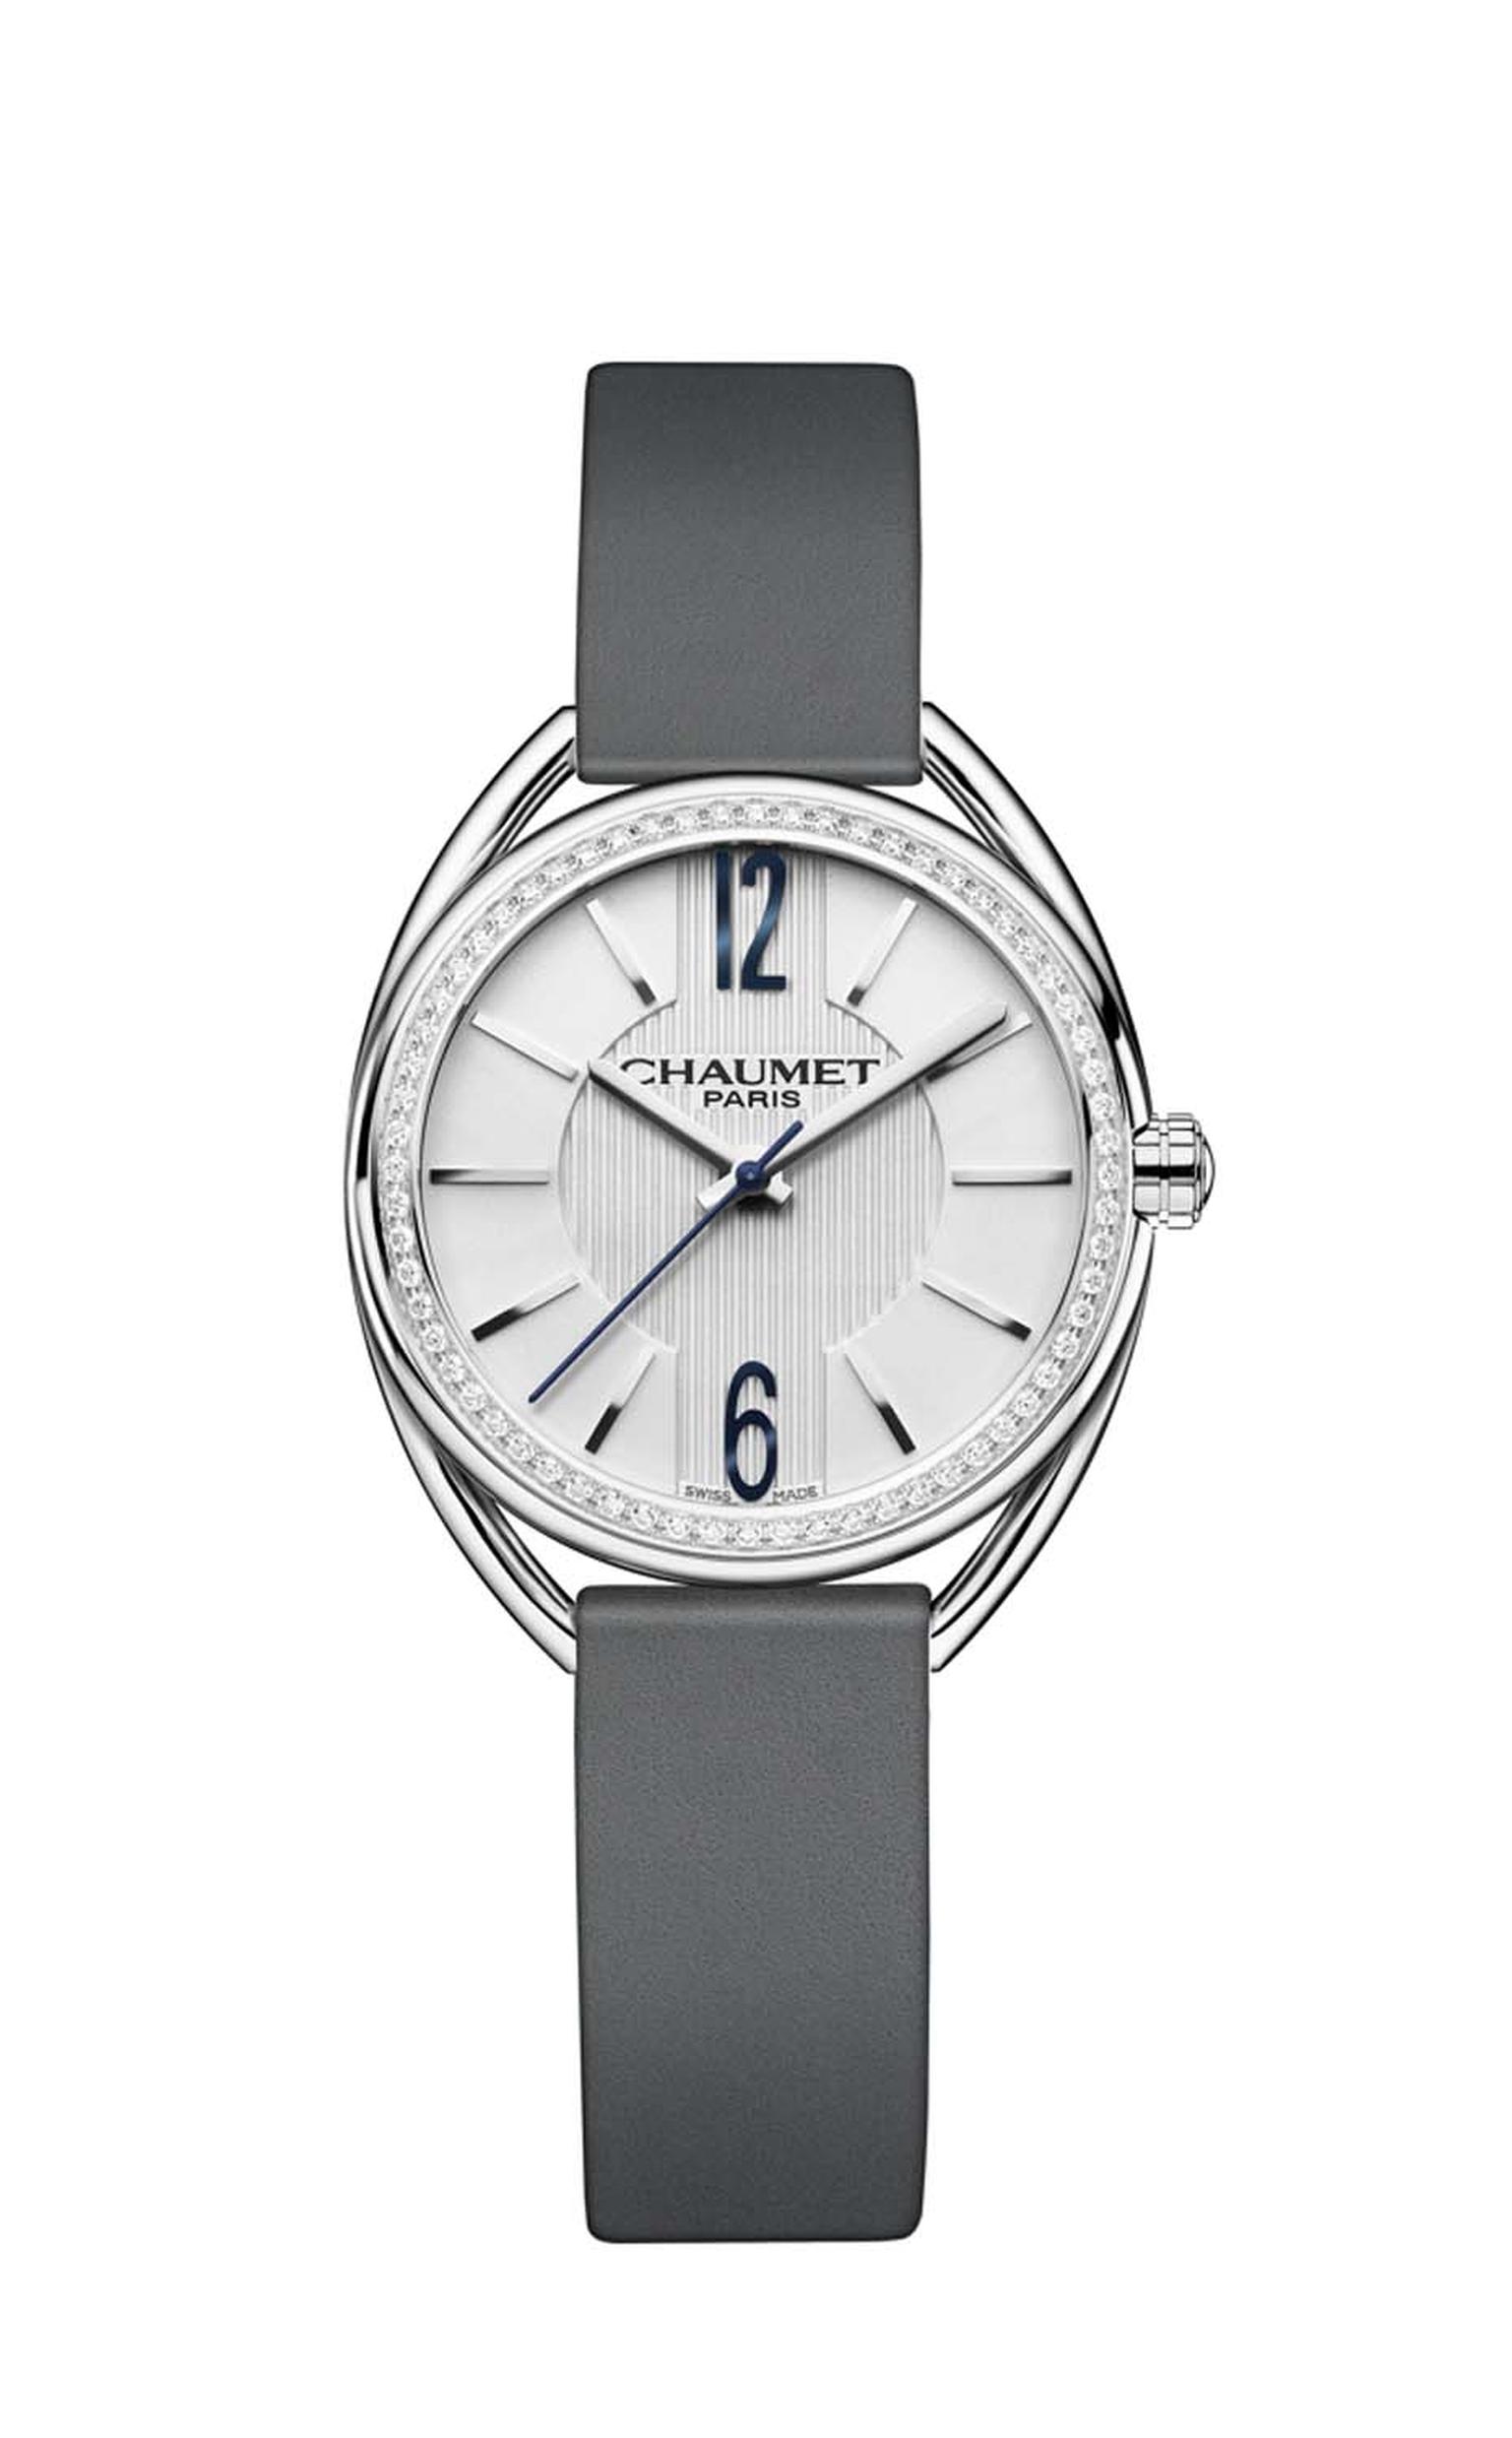 The 27mm Chaumet Liens watch in stainless steel version is enhanced with 56 brilliant-cut diamonds on the bezel, and the white dial, like a beautifully starched white shirt, features vertical pleats in the centre (£4,650).